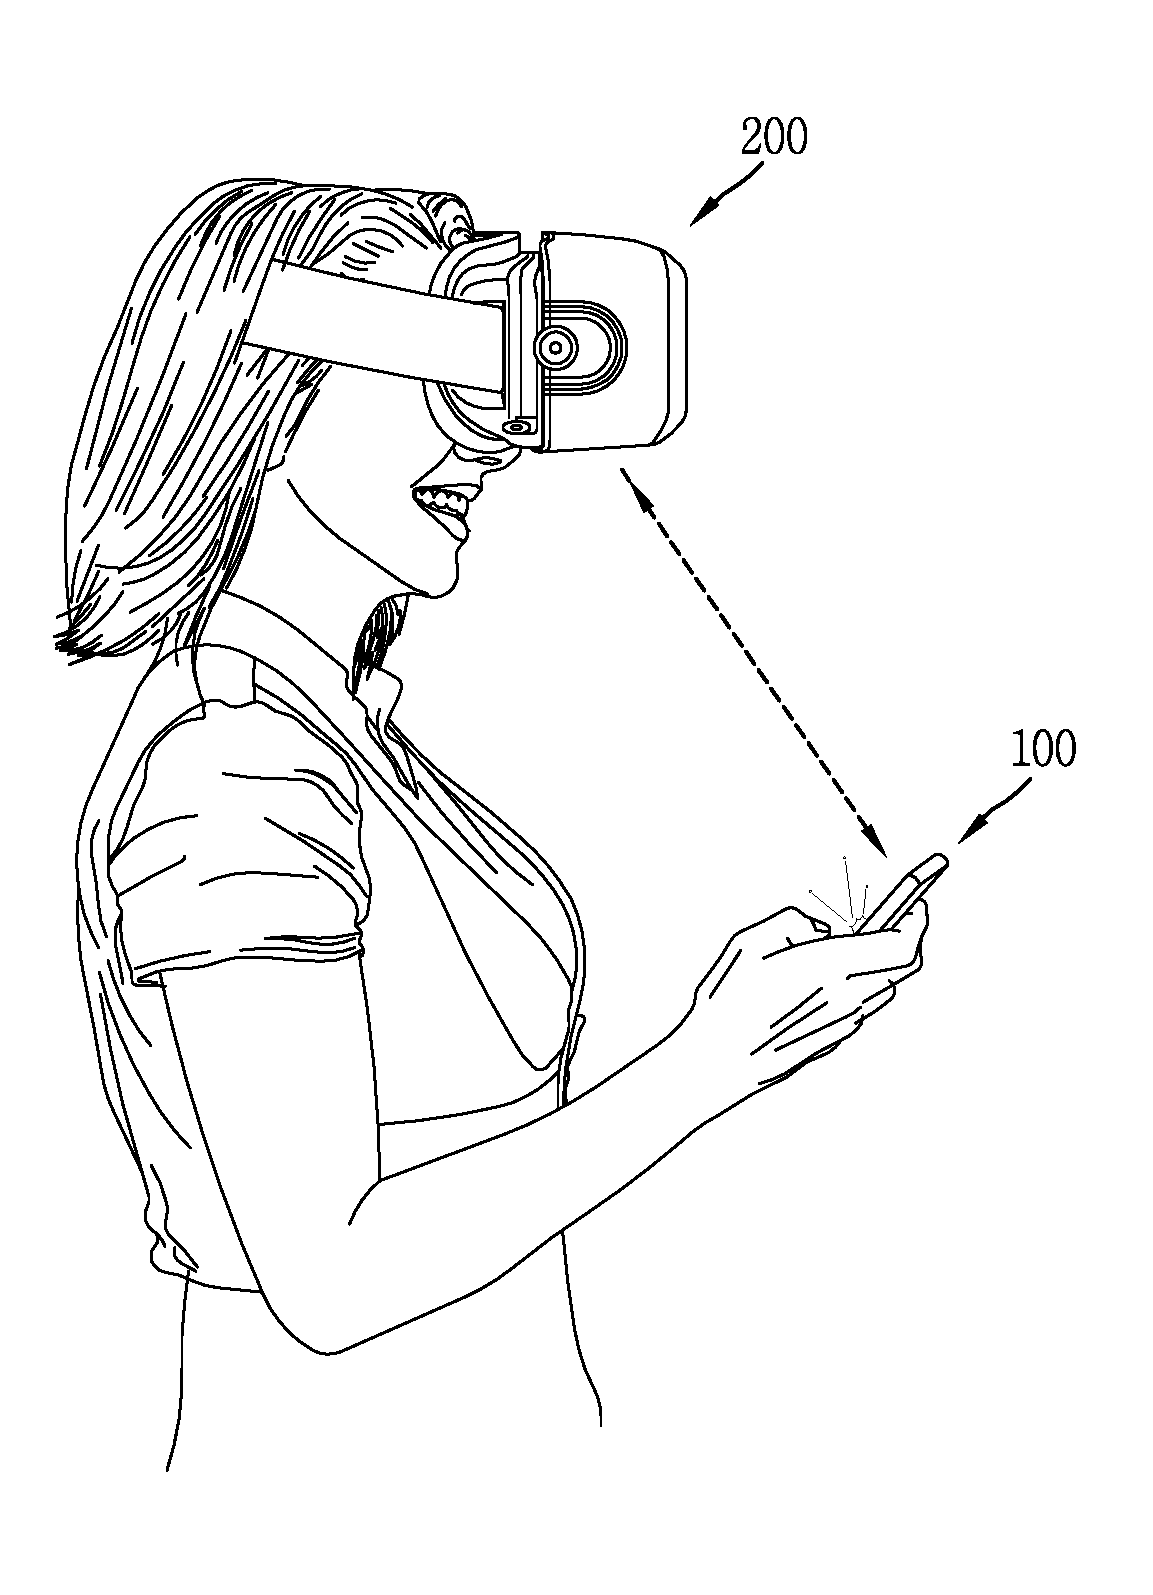 Head mounted display device and method for controlling the same